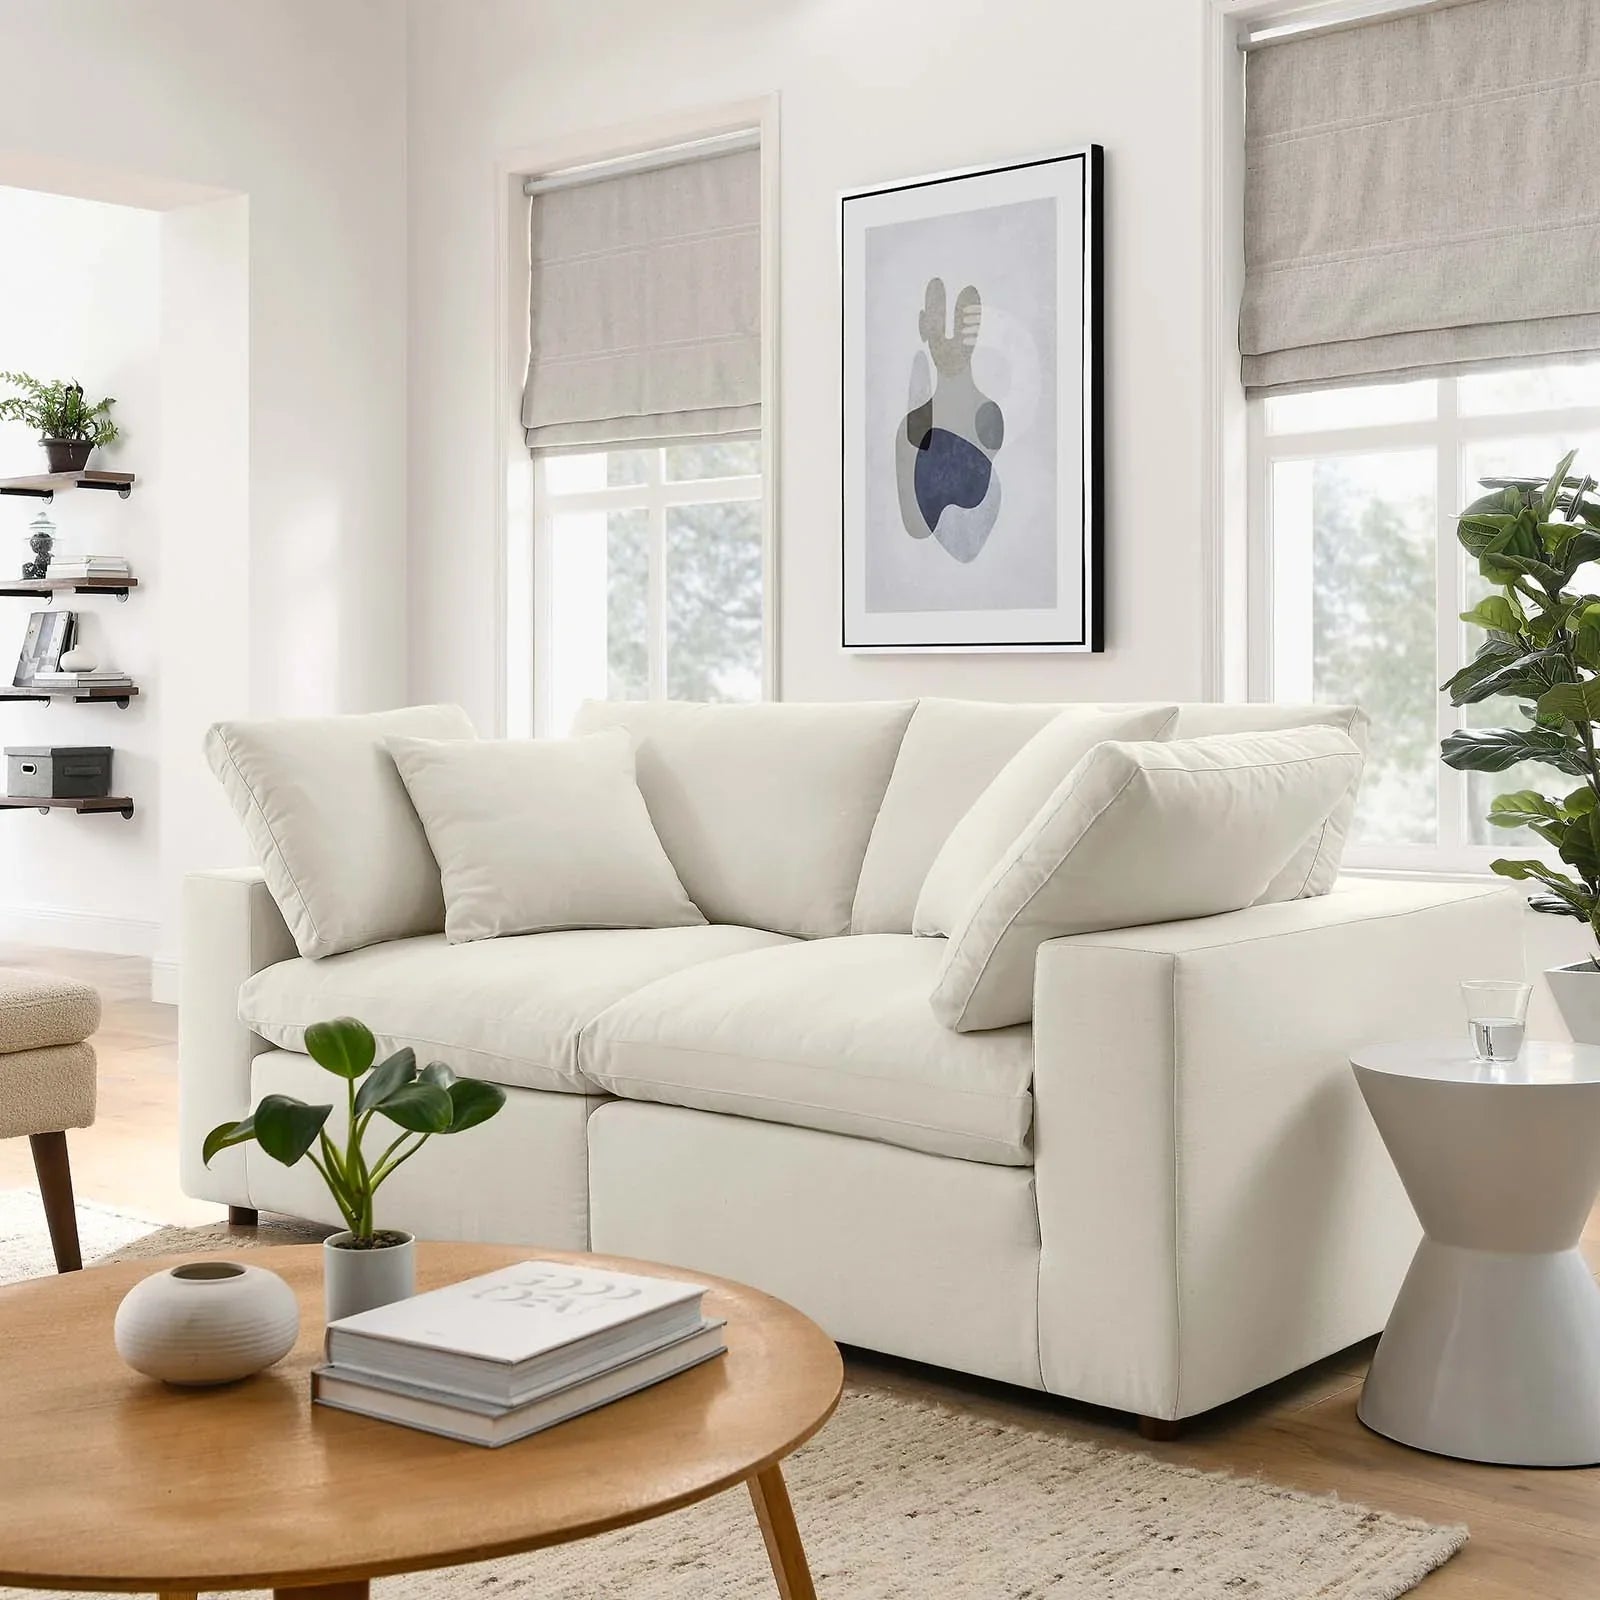 How to Clean Posh Modular Sectionals